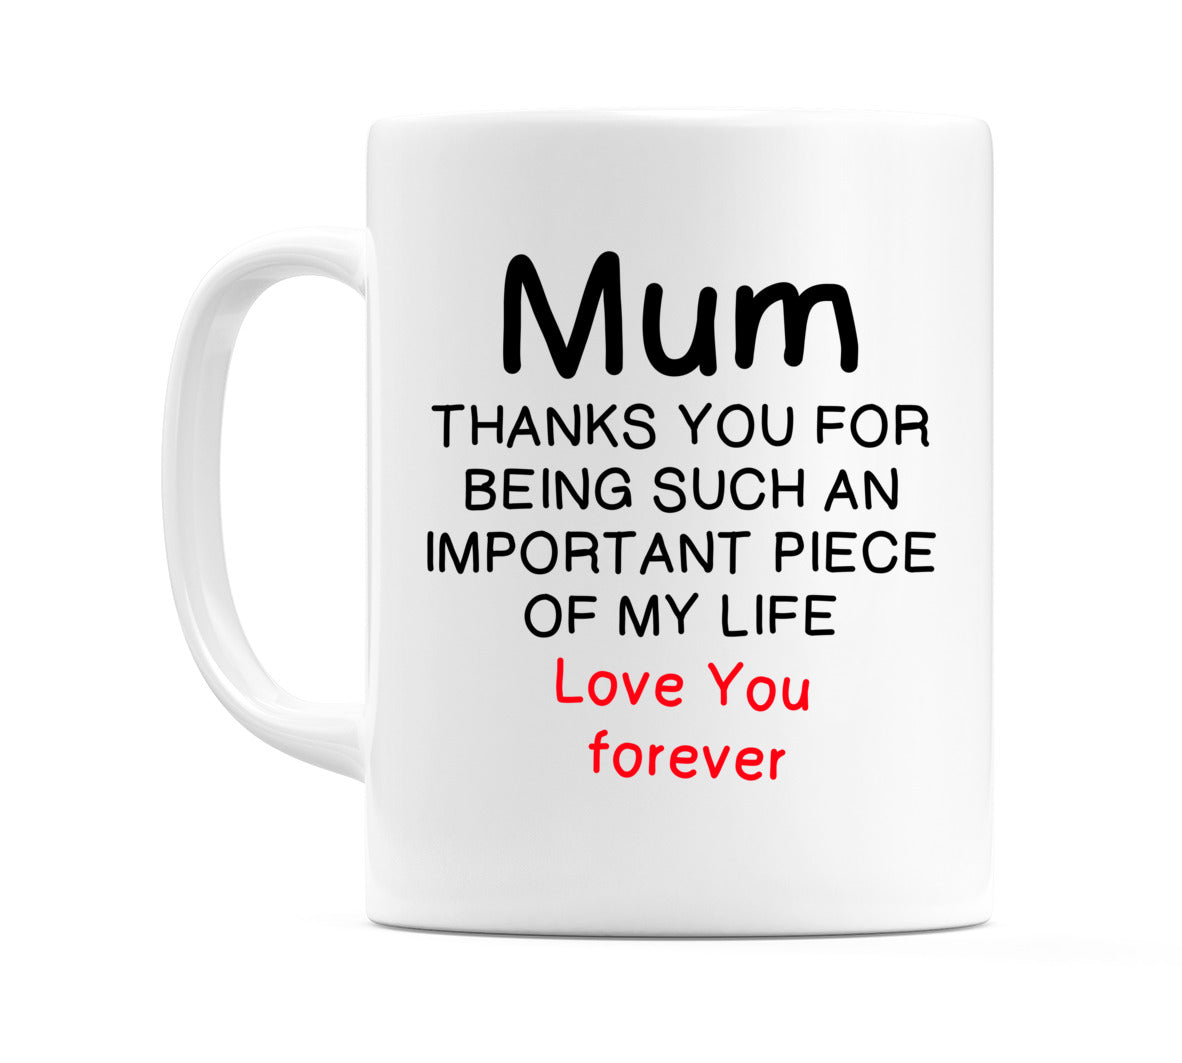 Mum Thanks you for being...